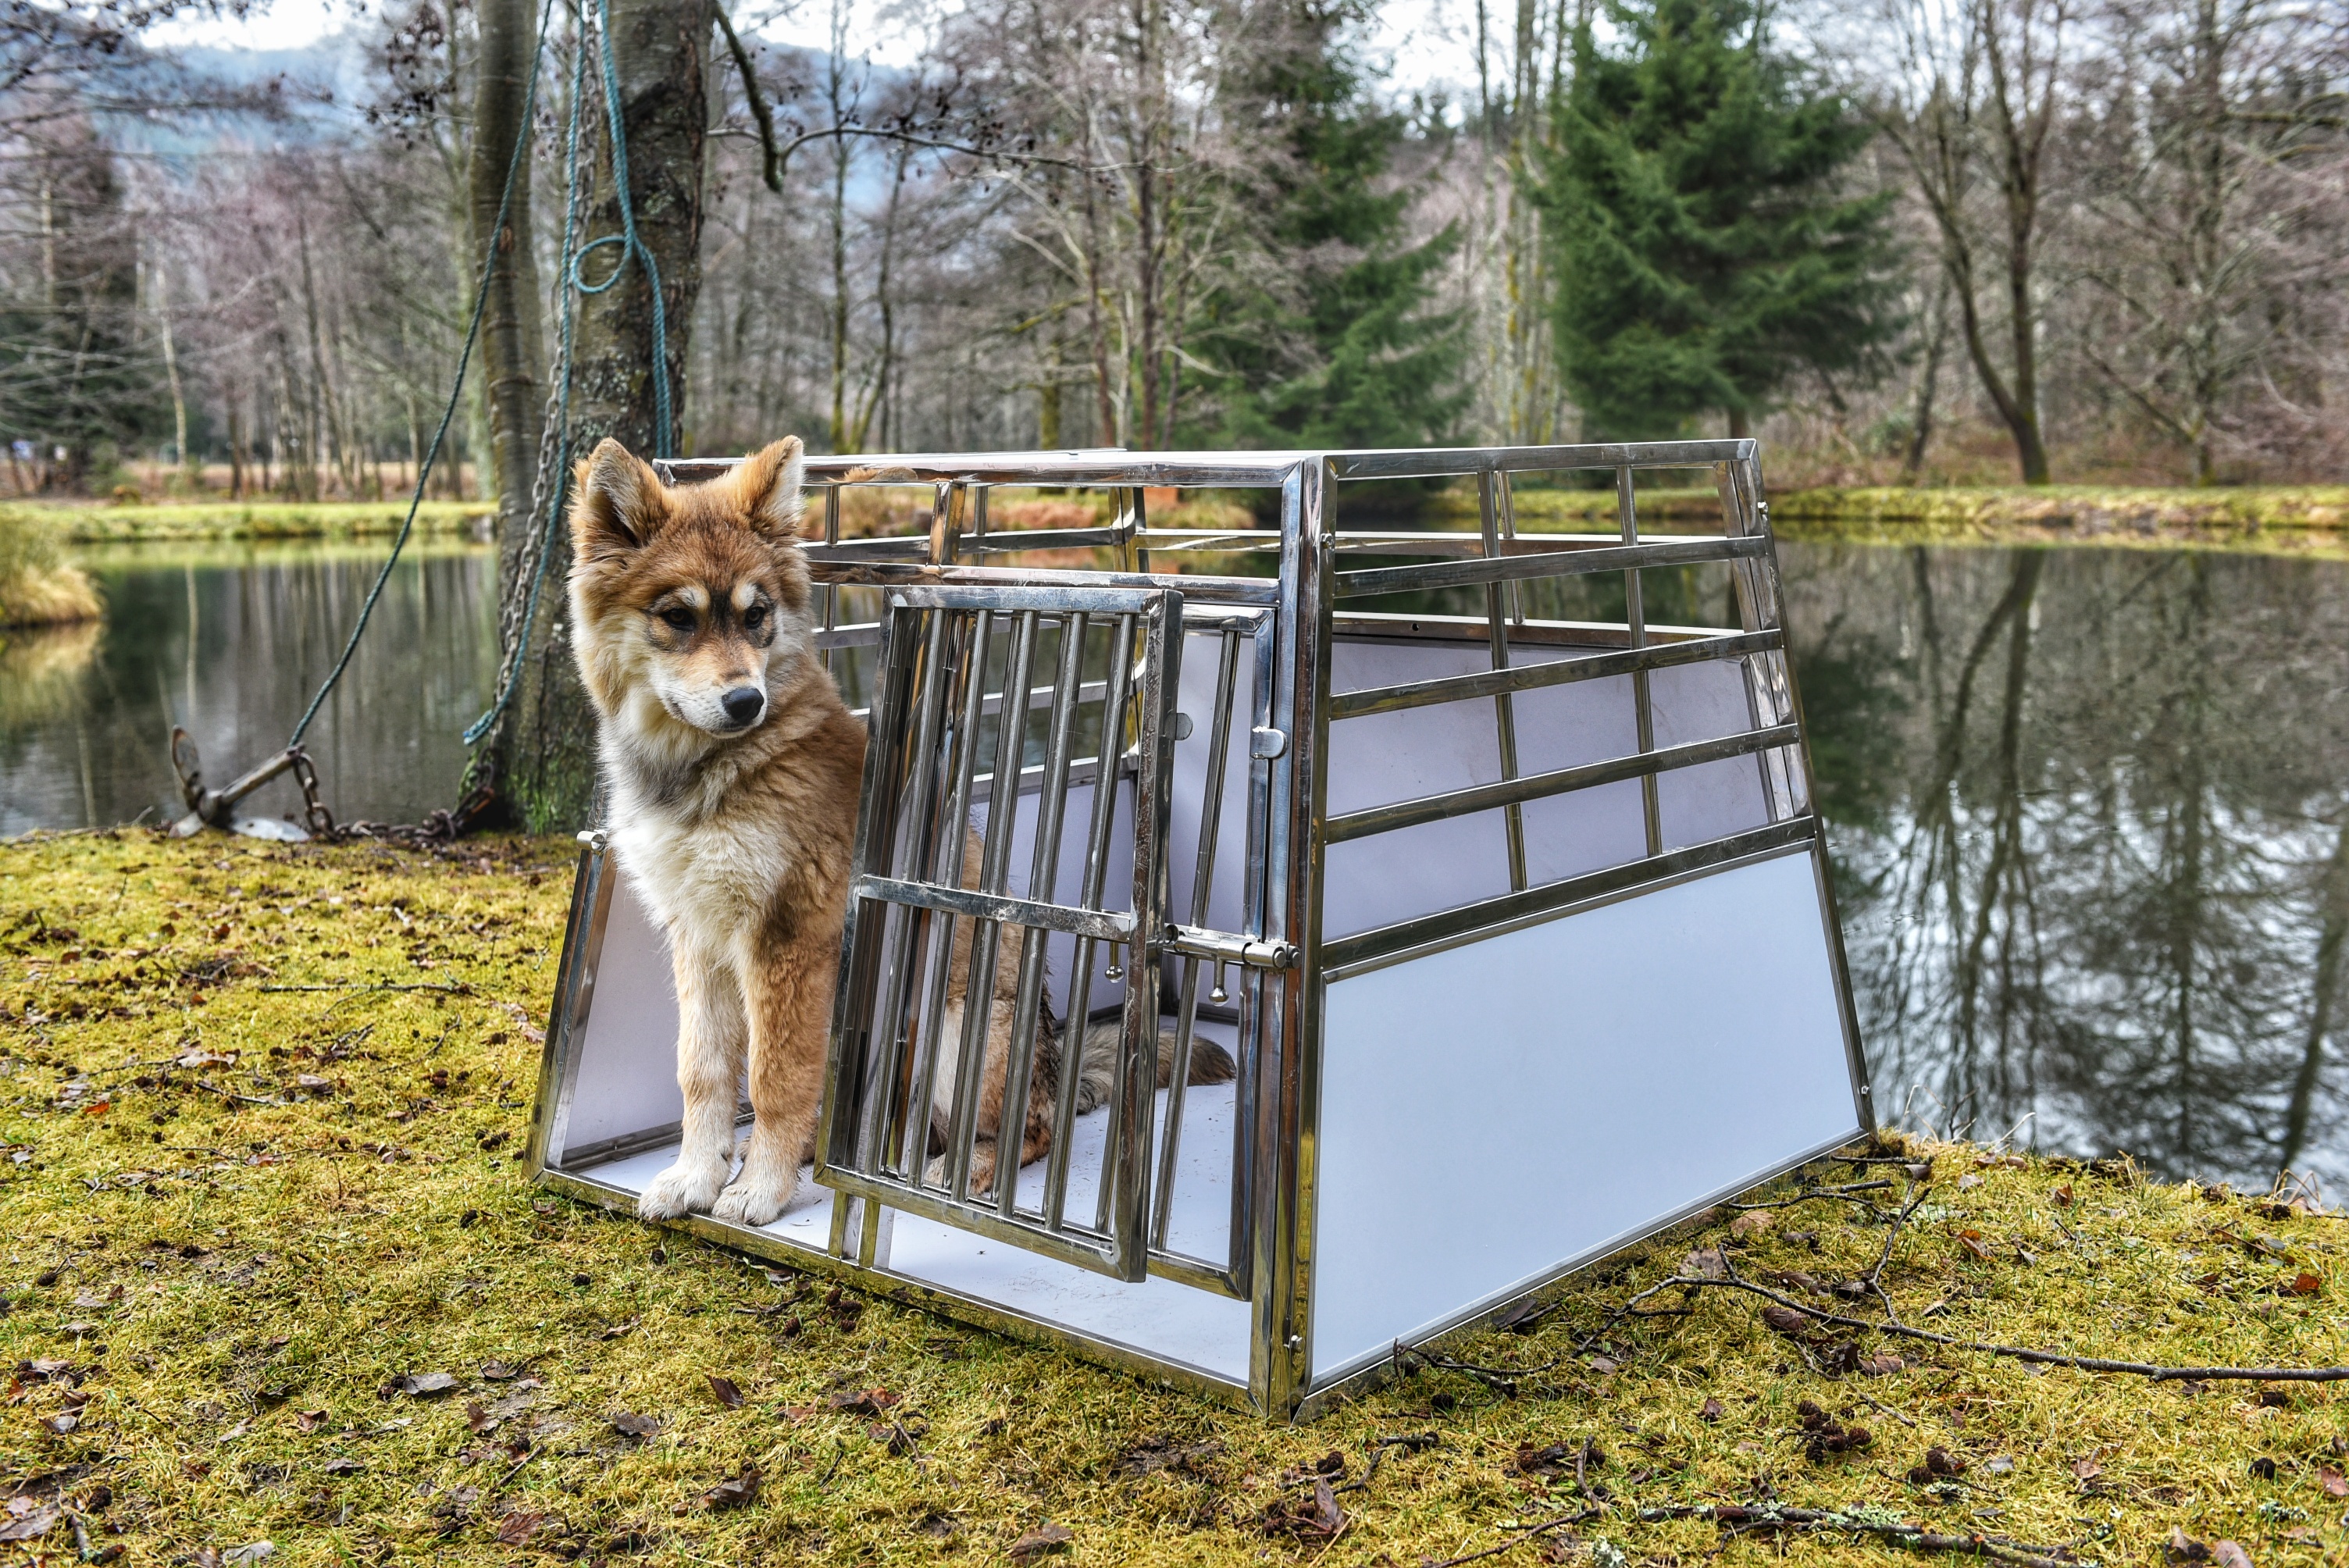 Cage Transport Chien DOUBLE / CAG-005